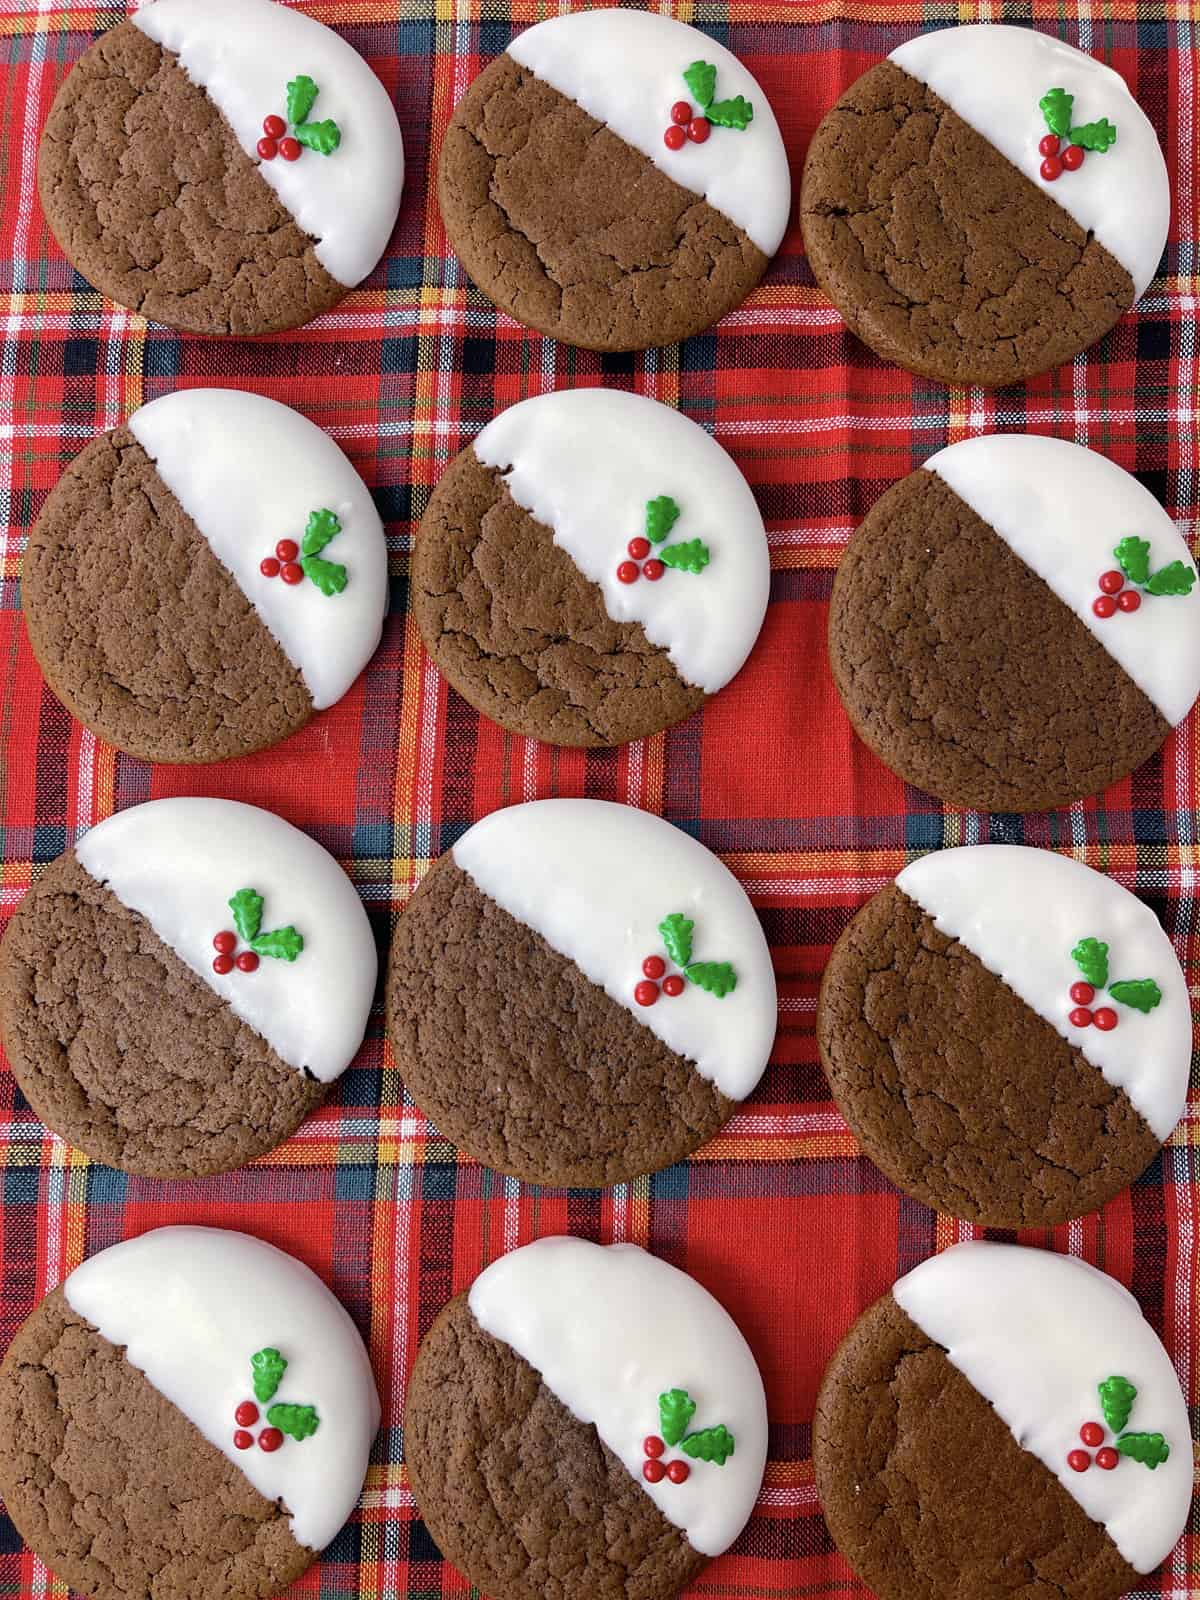 Four rows of pretty ginger cookies on a red plaid cloth.